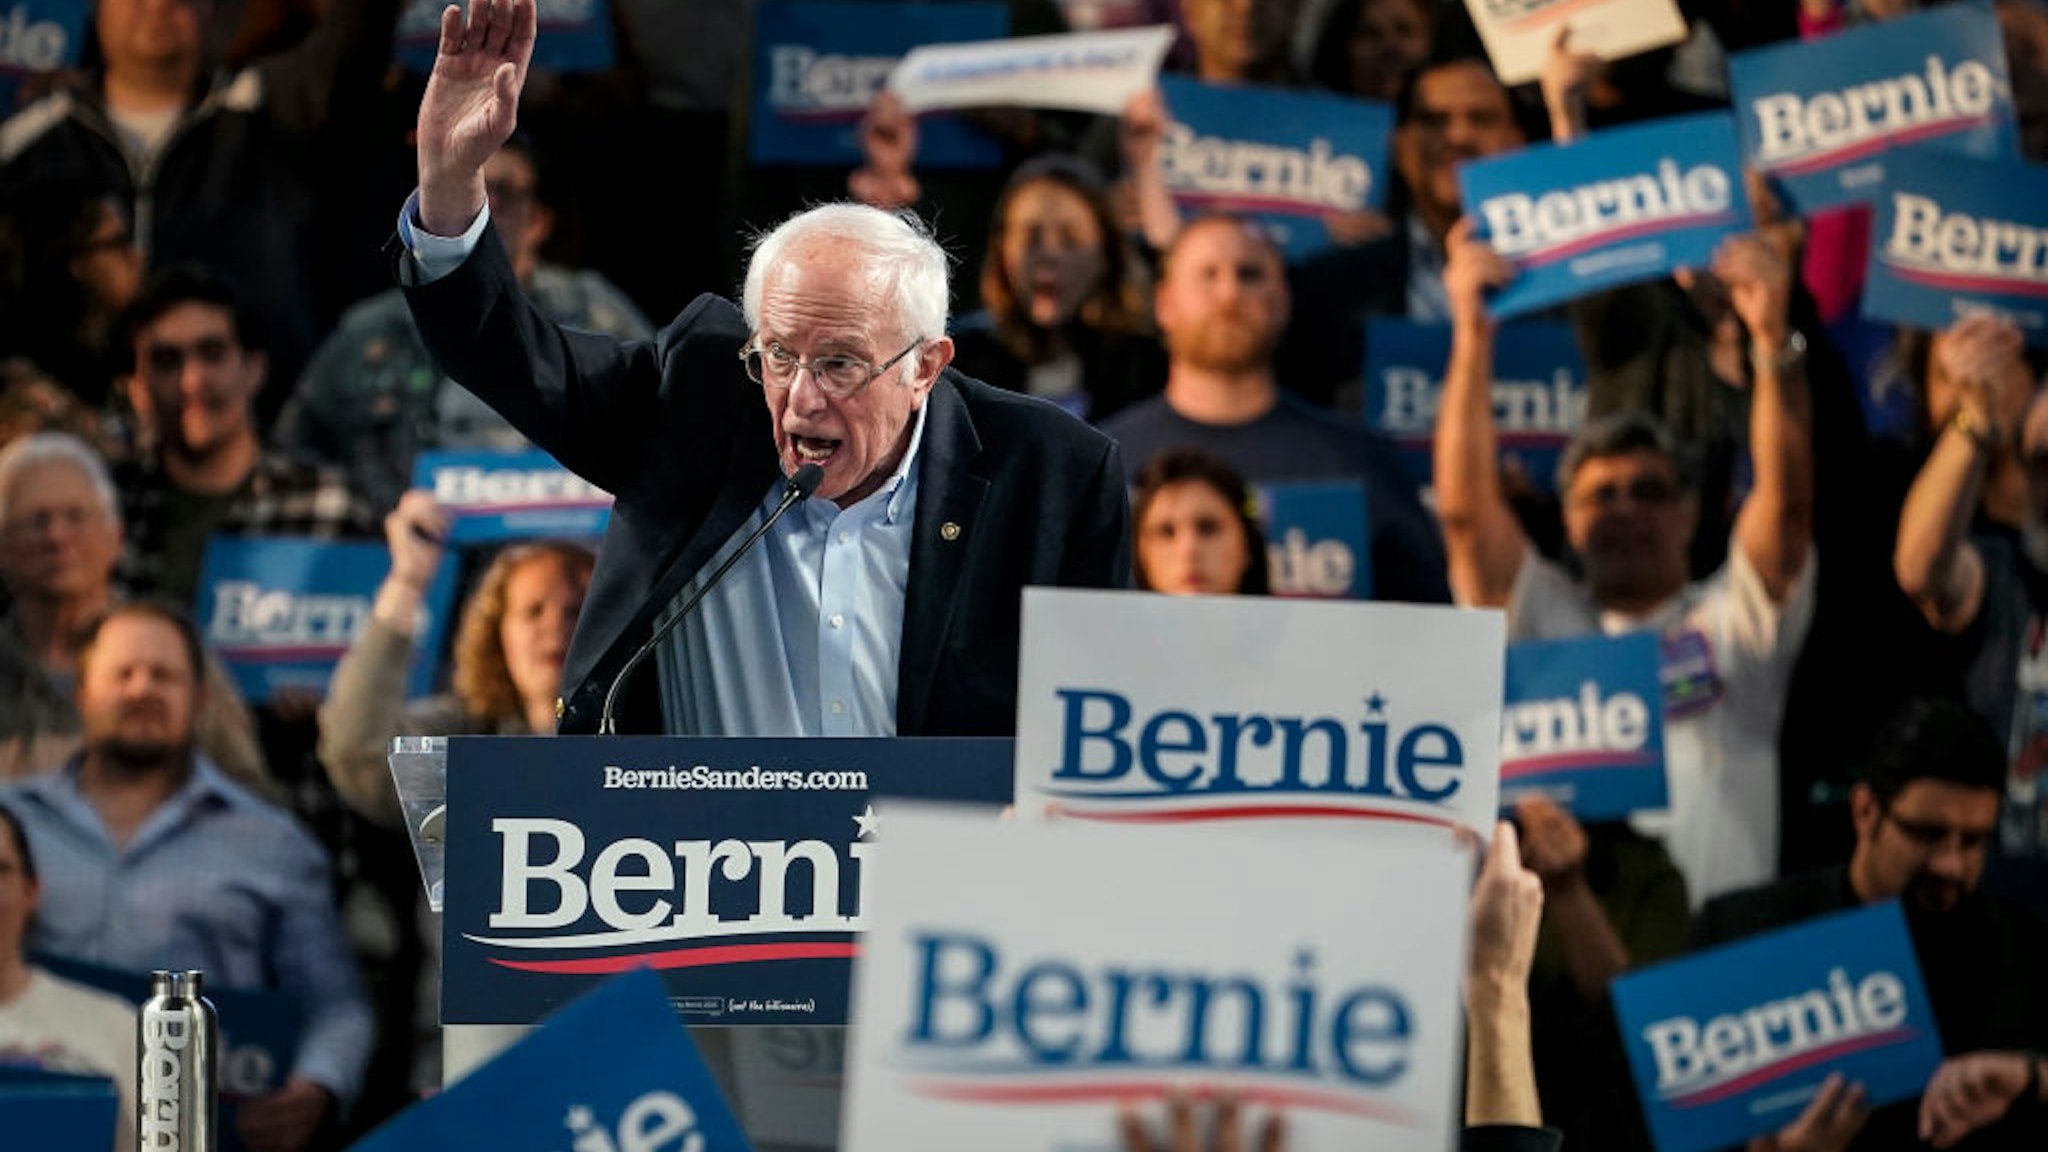 Democratic presidential candidate Sen. Bernie Sanders (I-VT) speaks during a campaign rally at the University of Houston on February 23, 2020 in Houston, Texas.